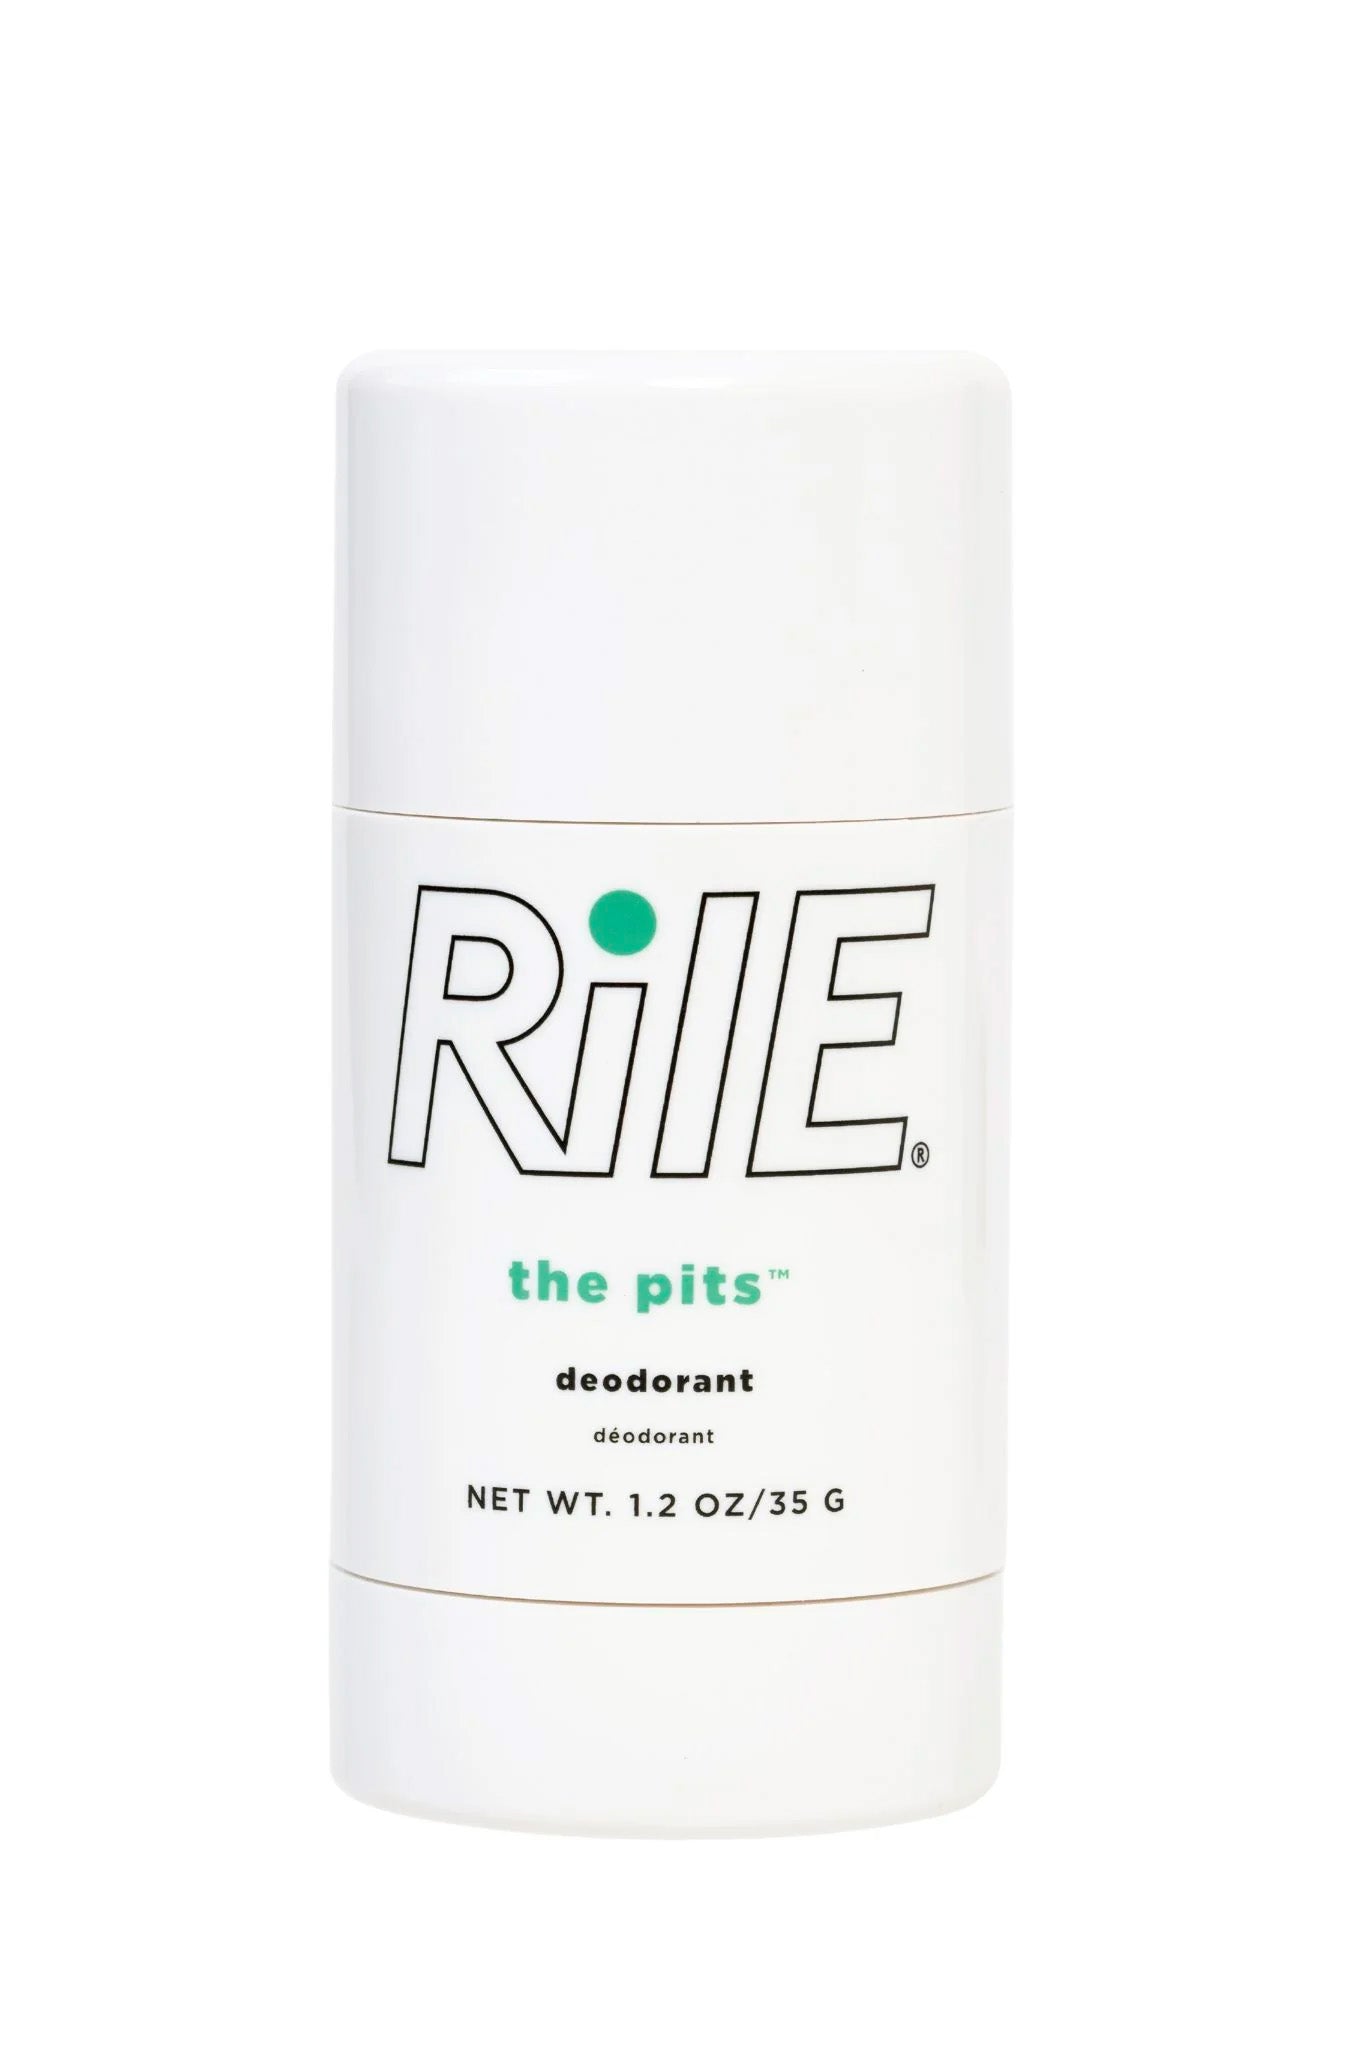 A deodorant with no aluminum for kids, young teens or tweens in a white tube stick with the Rile logo on the outside. Appropriate for teen hygiene.